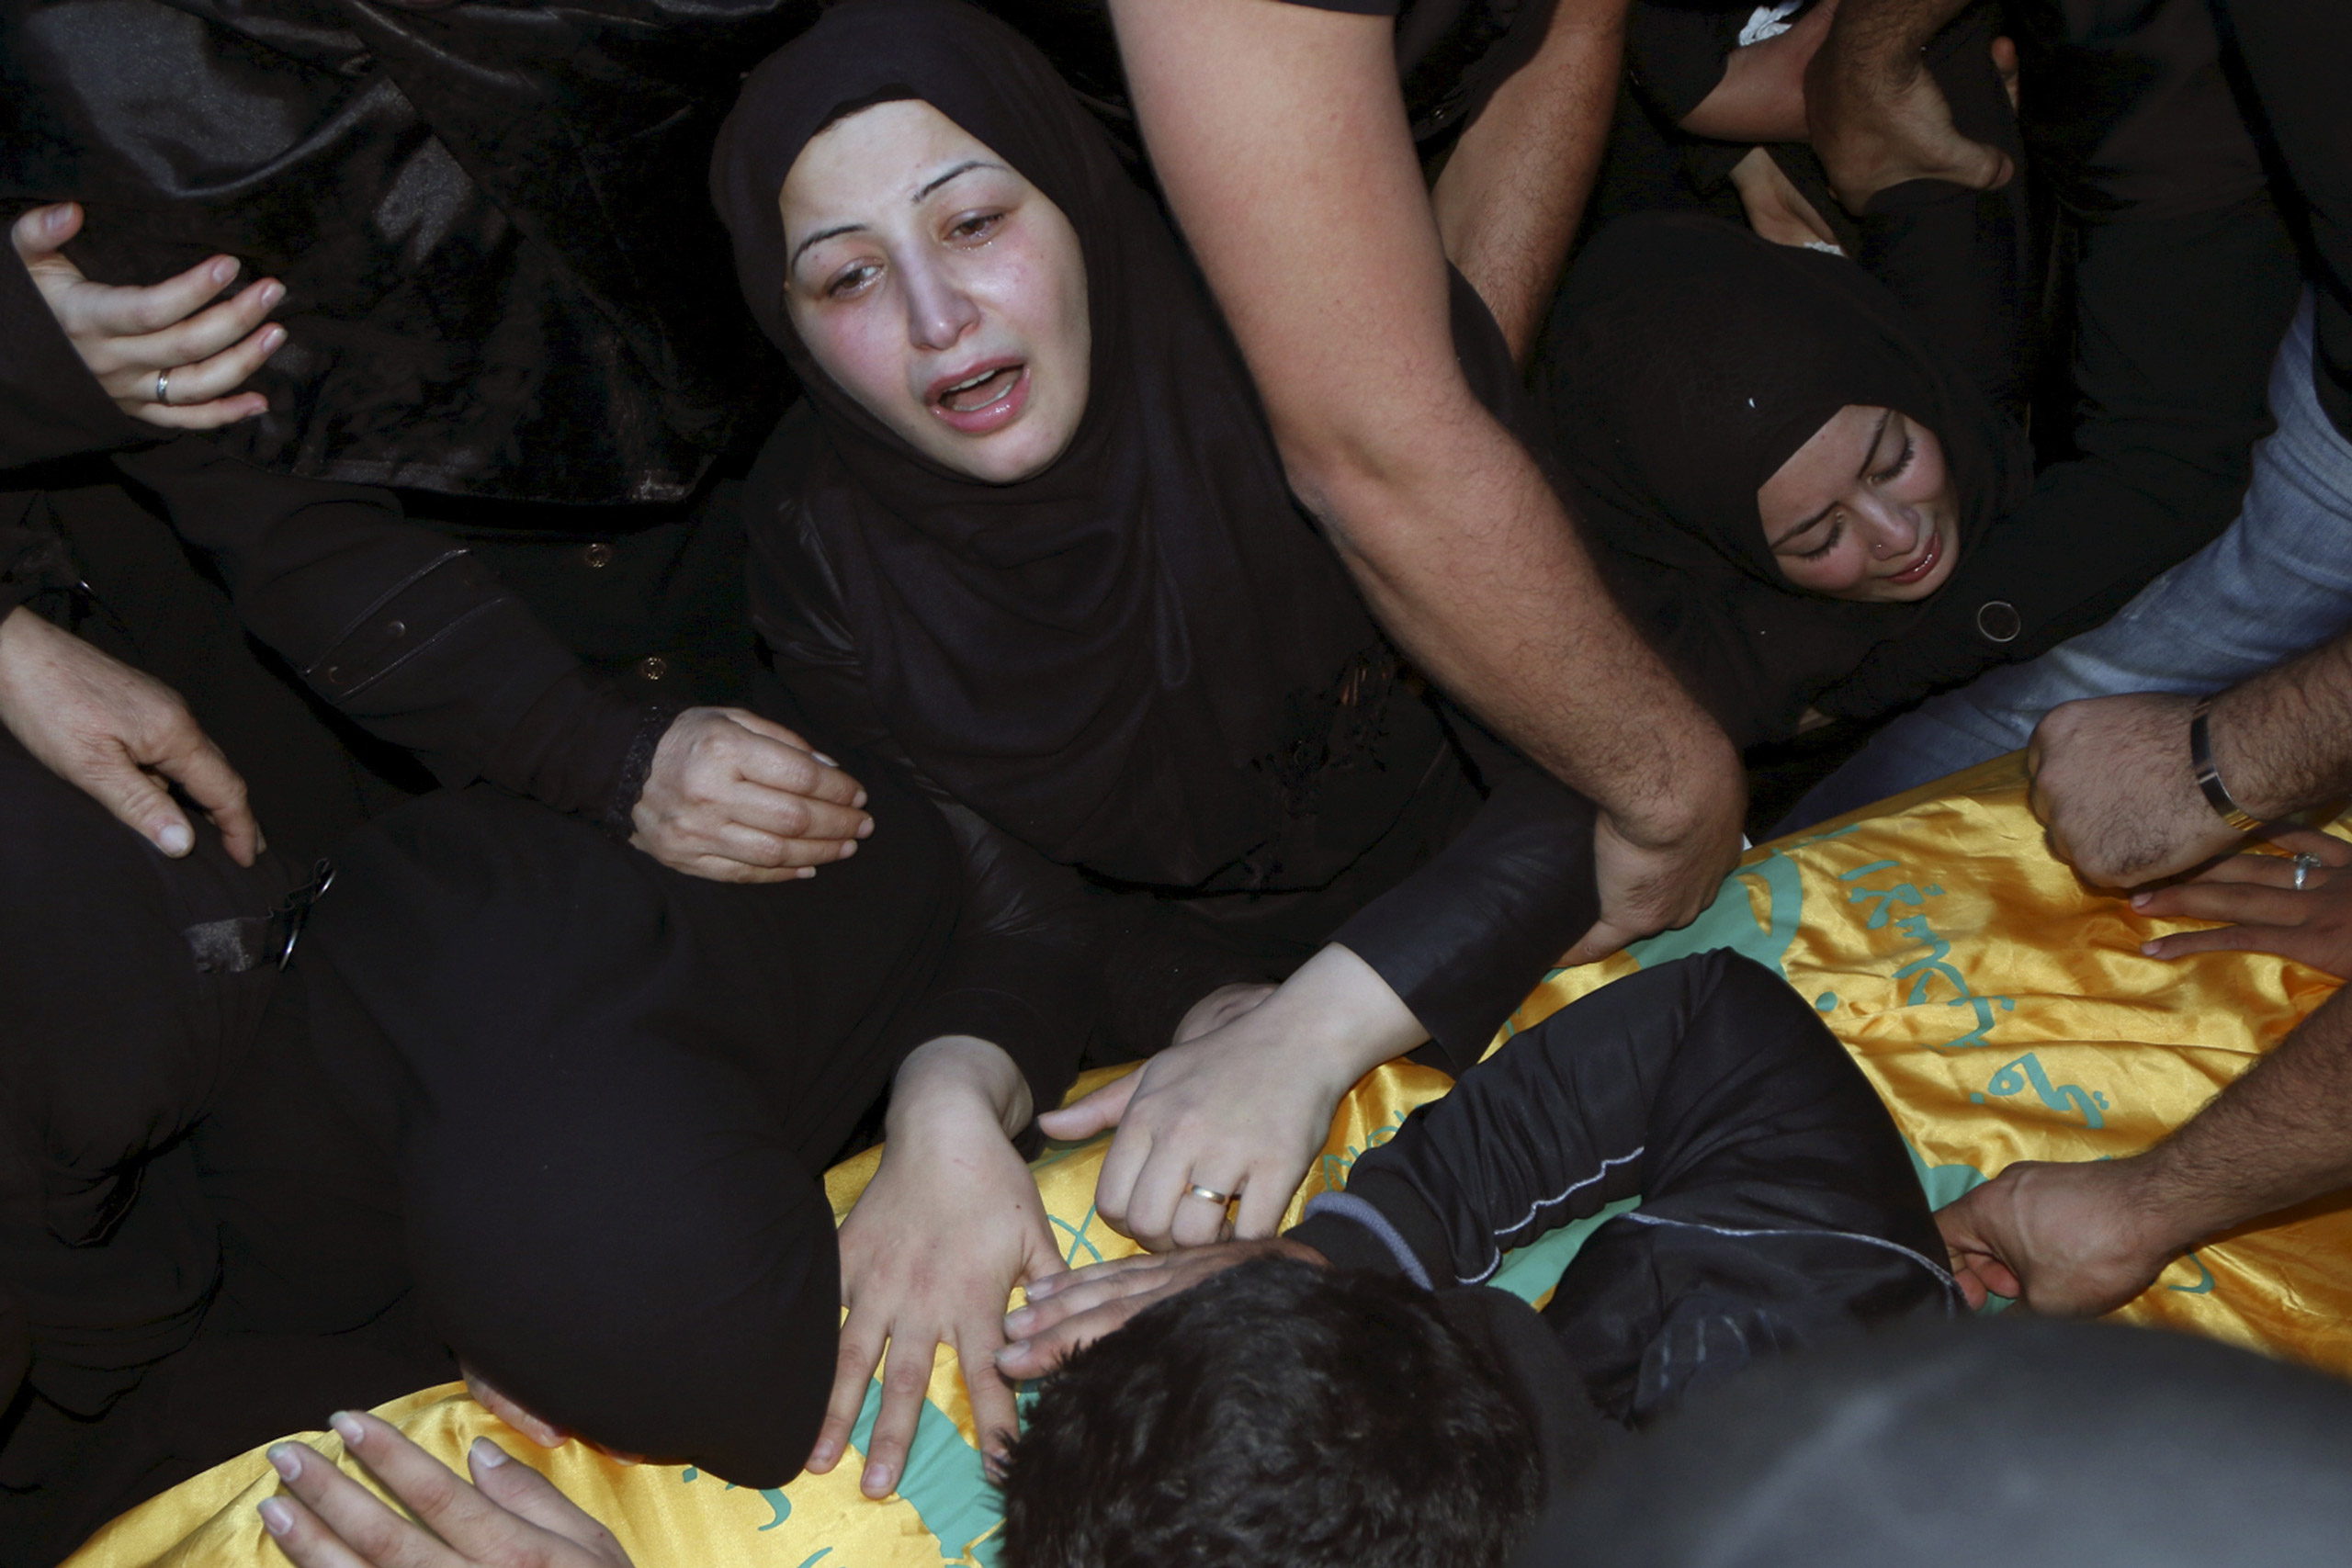 Relatives mourn over the coffin of Hezbollah member Adel Akram Termos, who was killed in the two explosions that occurred on Thursday in Beirut's southern suburbs, during his funeral in Tallousa, southern Lebanon, on Nov. 13, 2015. (Karamallah Daher—Reuters)